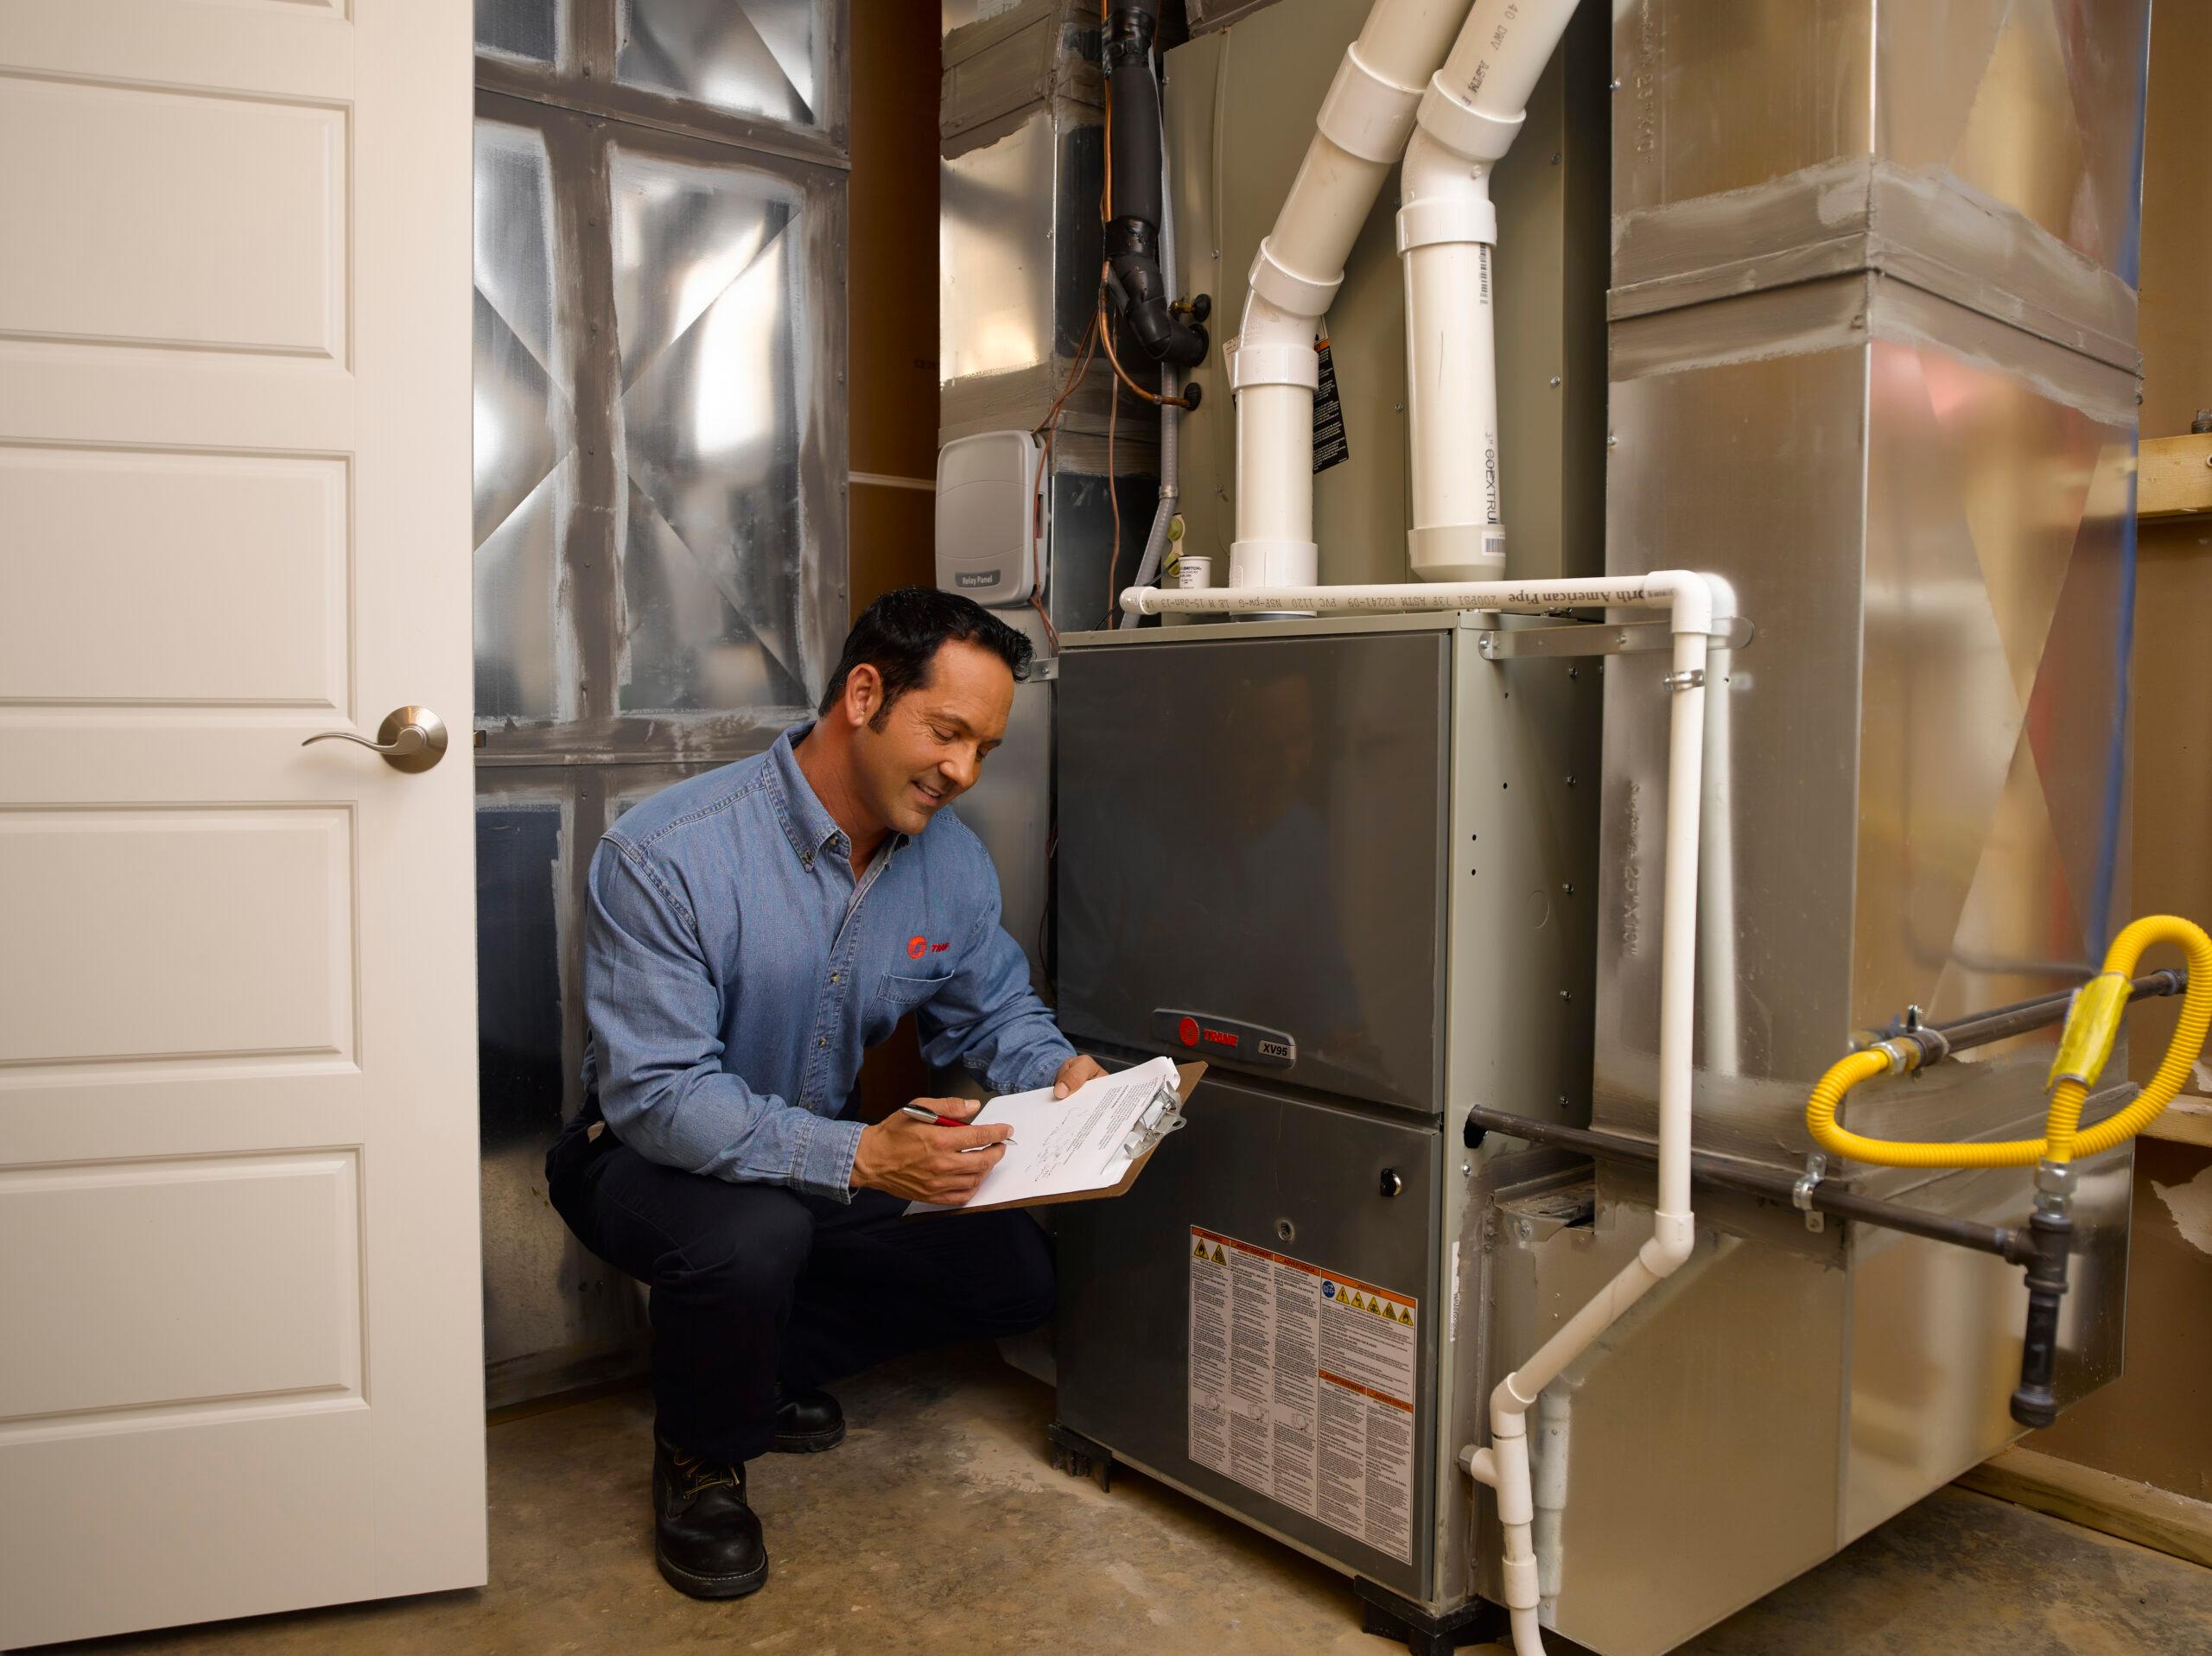 Trane HVAC technician holds a clipboard and smiles as he inspects an indoor heating and cooling system.